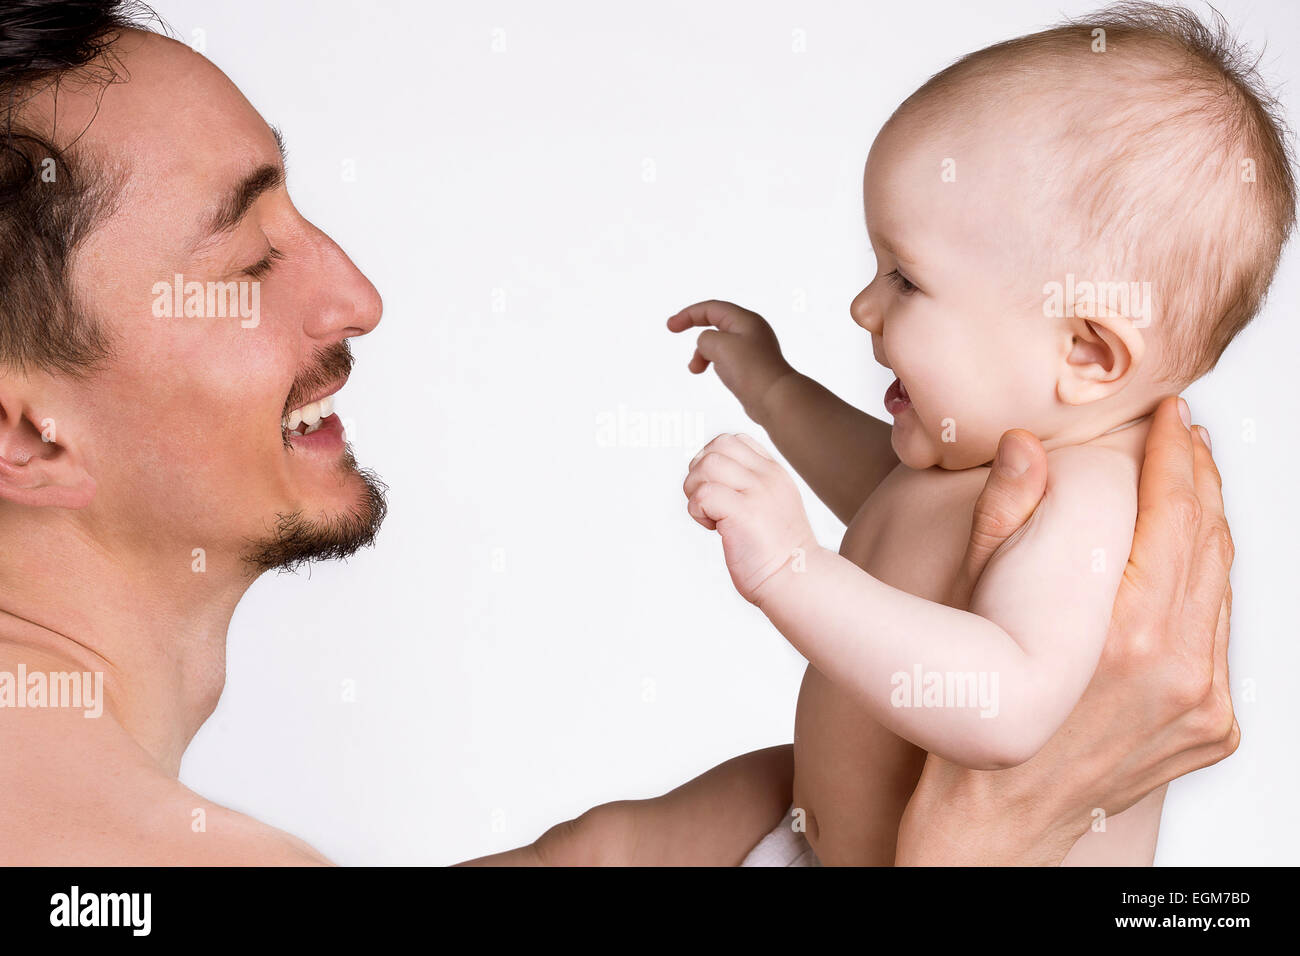 father holding a baby and laughing on white background Stock Photo